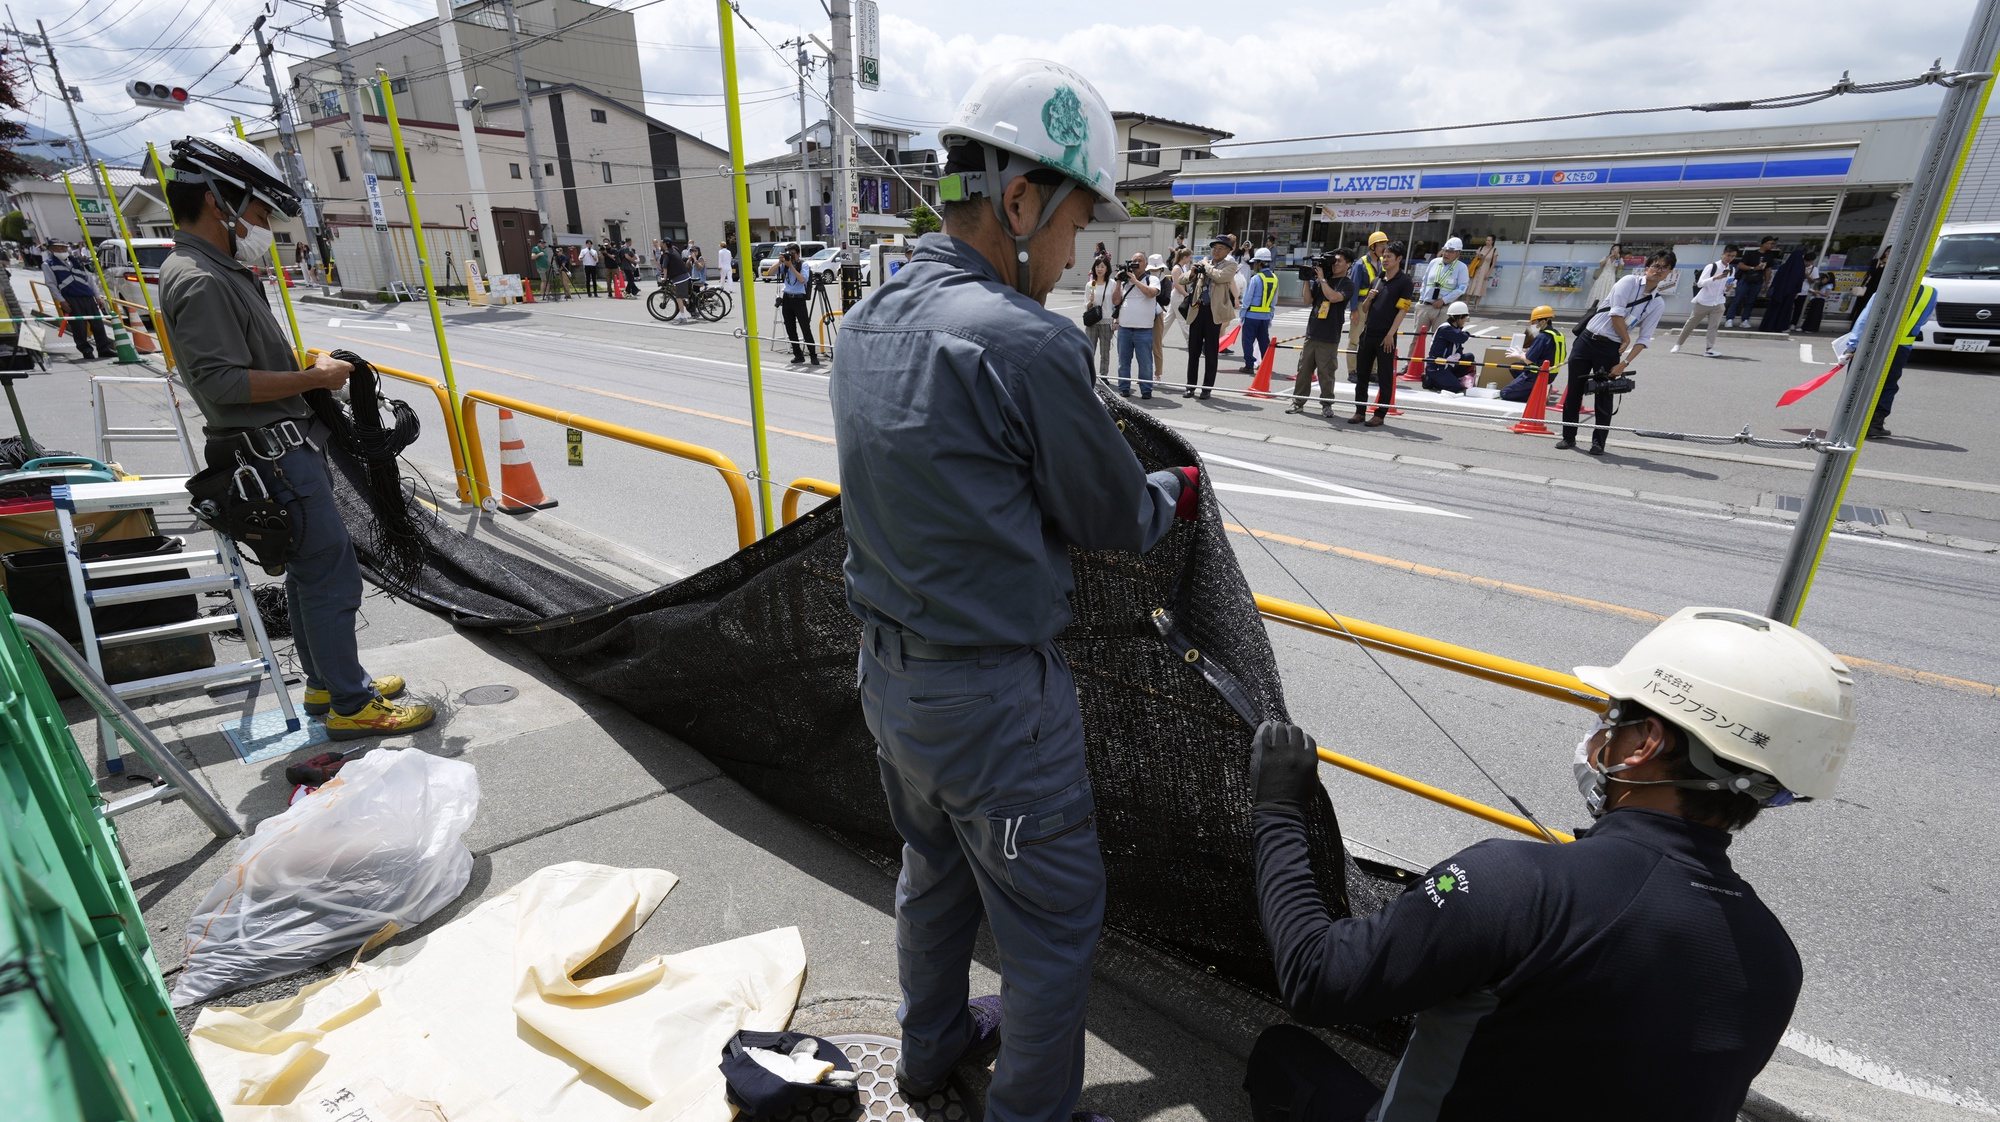 epa11356932 Workers install a black shading net on the opposite side of the Lawson Kawaguchiko Ekimae convenience store in Fujikawaguchiko, north of Mount Fuji, Japan, 21 May 2024. The town of Fujikawaguchiko, north of Mount Fuji, installed a black shading net to block the view of Japan&#039;s iconic volcano from a particular spot before the Lawson Kawaguchiko Ekimae convenience store that became popular in the last two years to deter tourists who crowd there to photograph it following complains from locals.  EPA/FRANCK ROBICHON